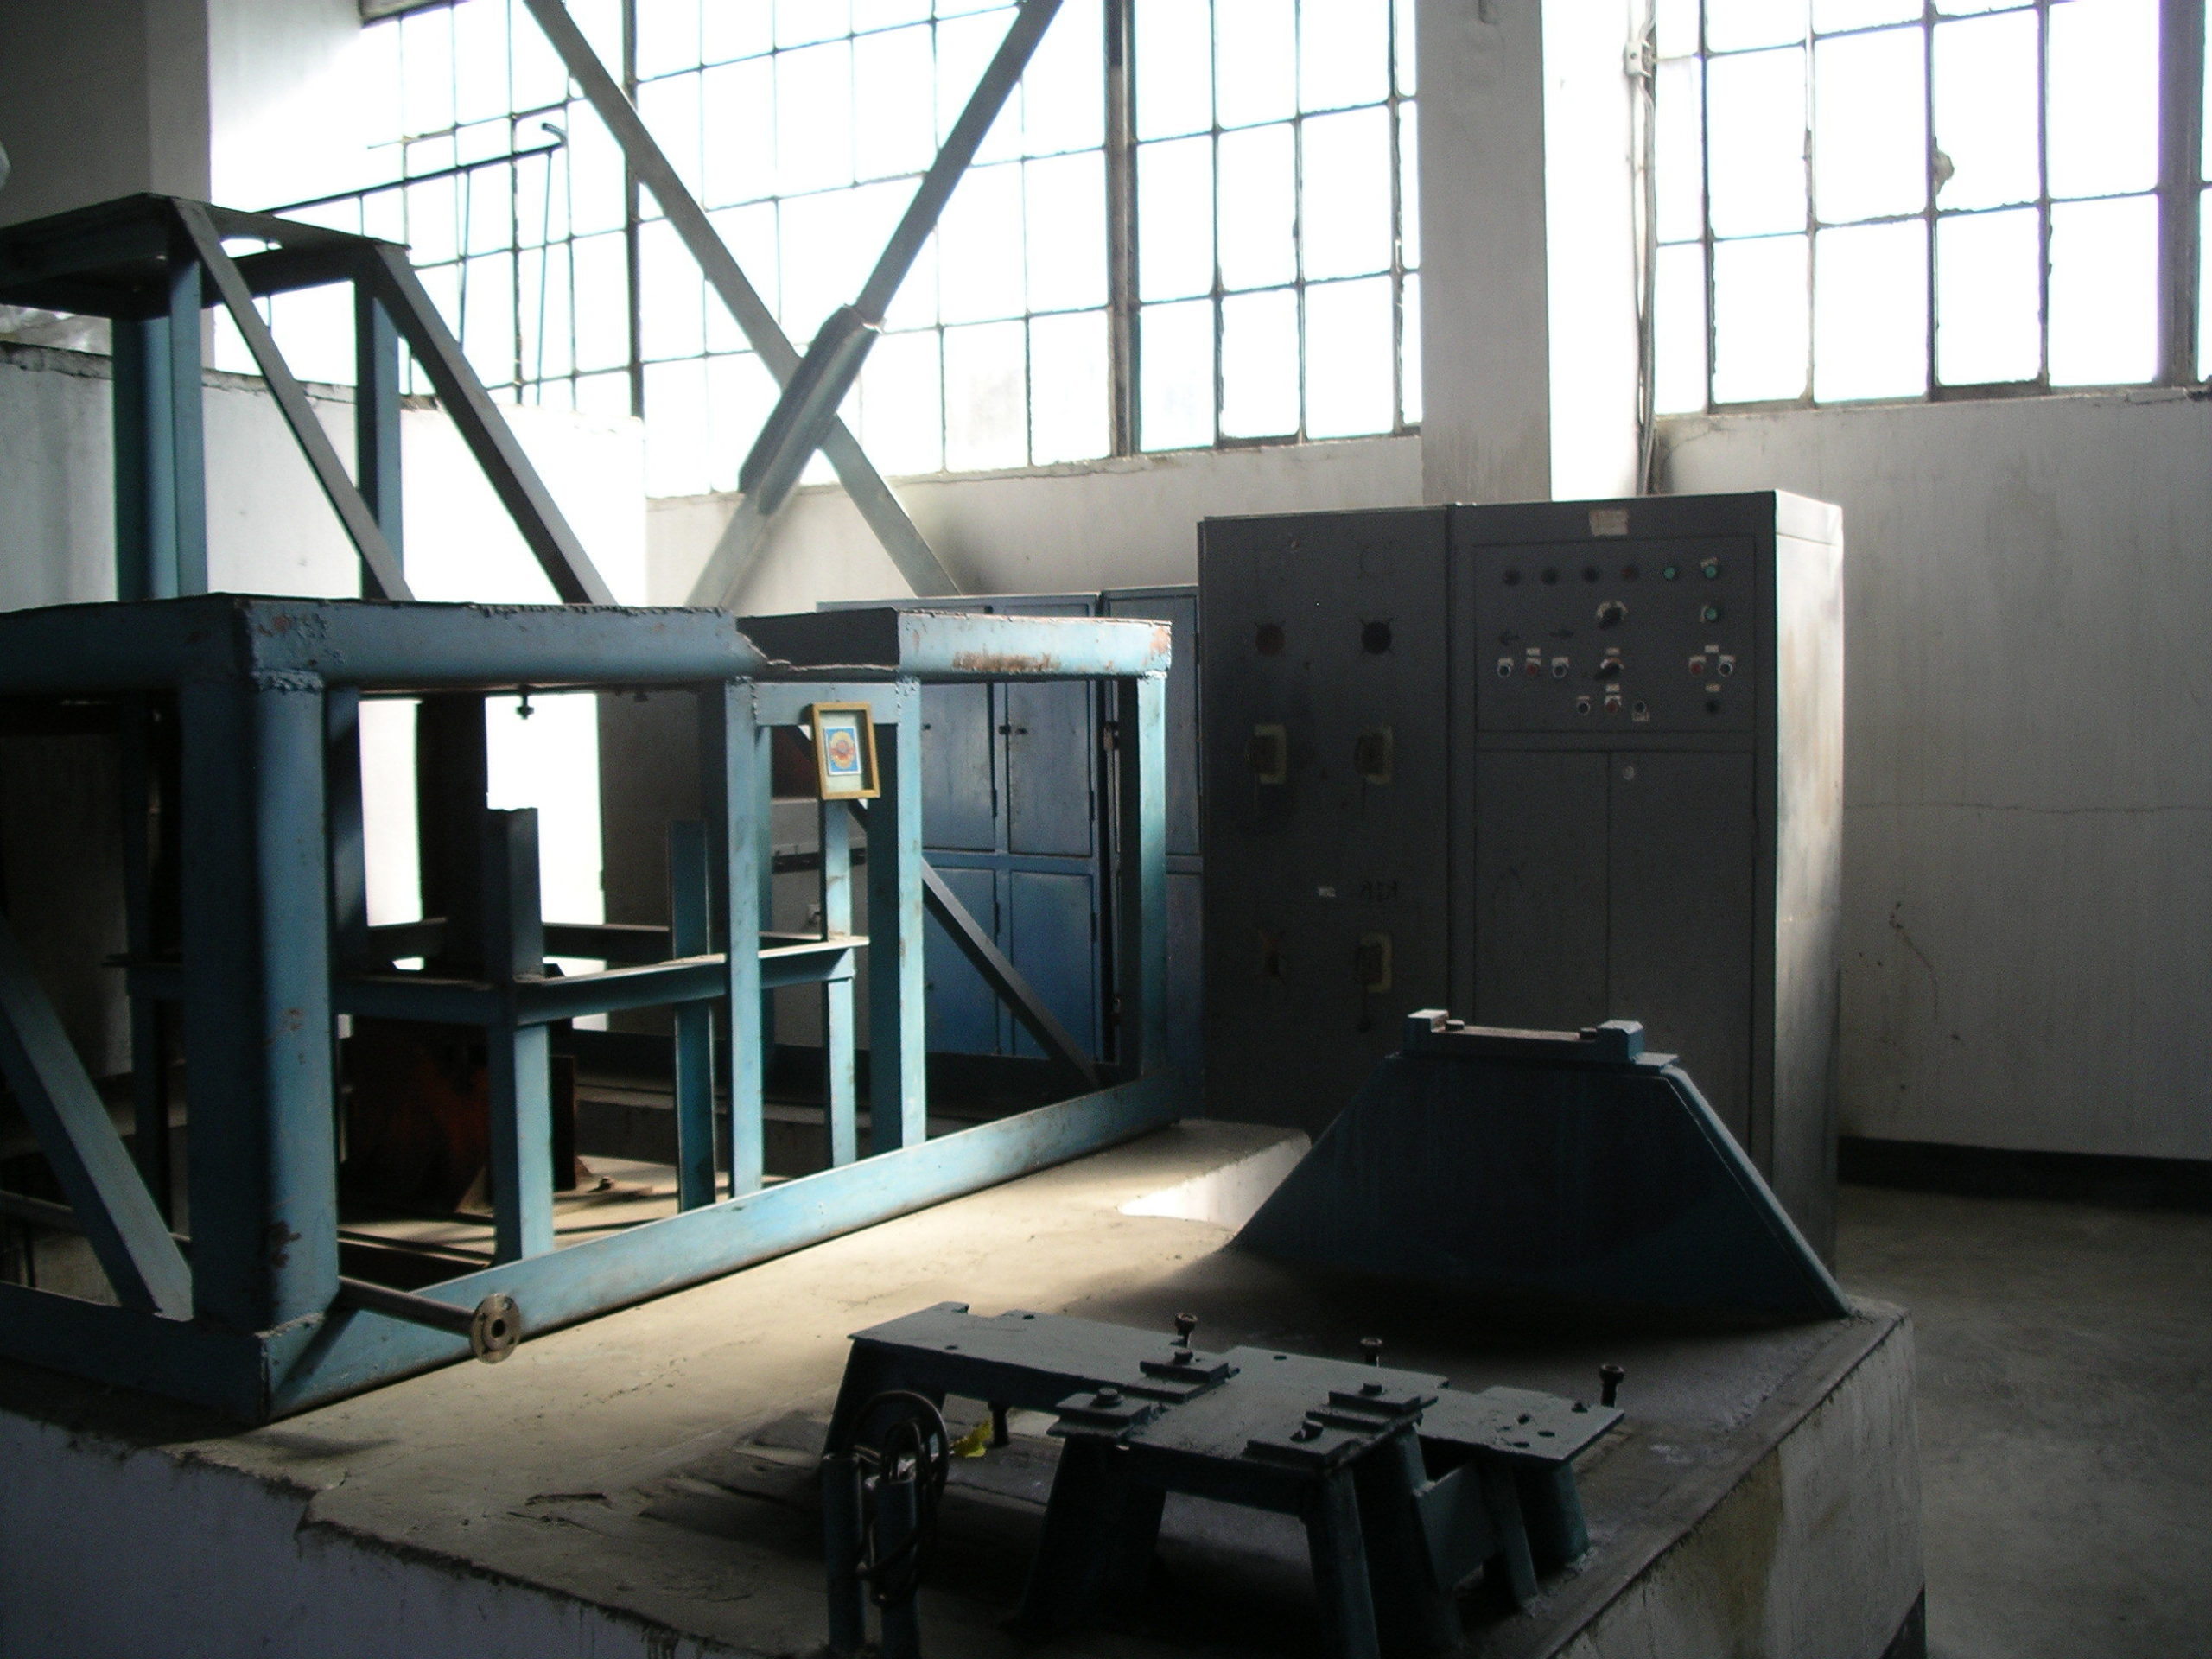 Industrial space with large window running the length of the wall and some steel structures and beams